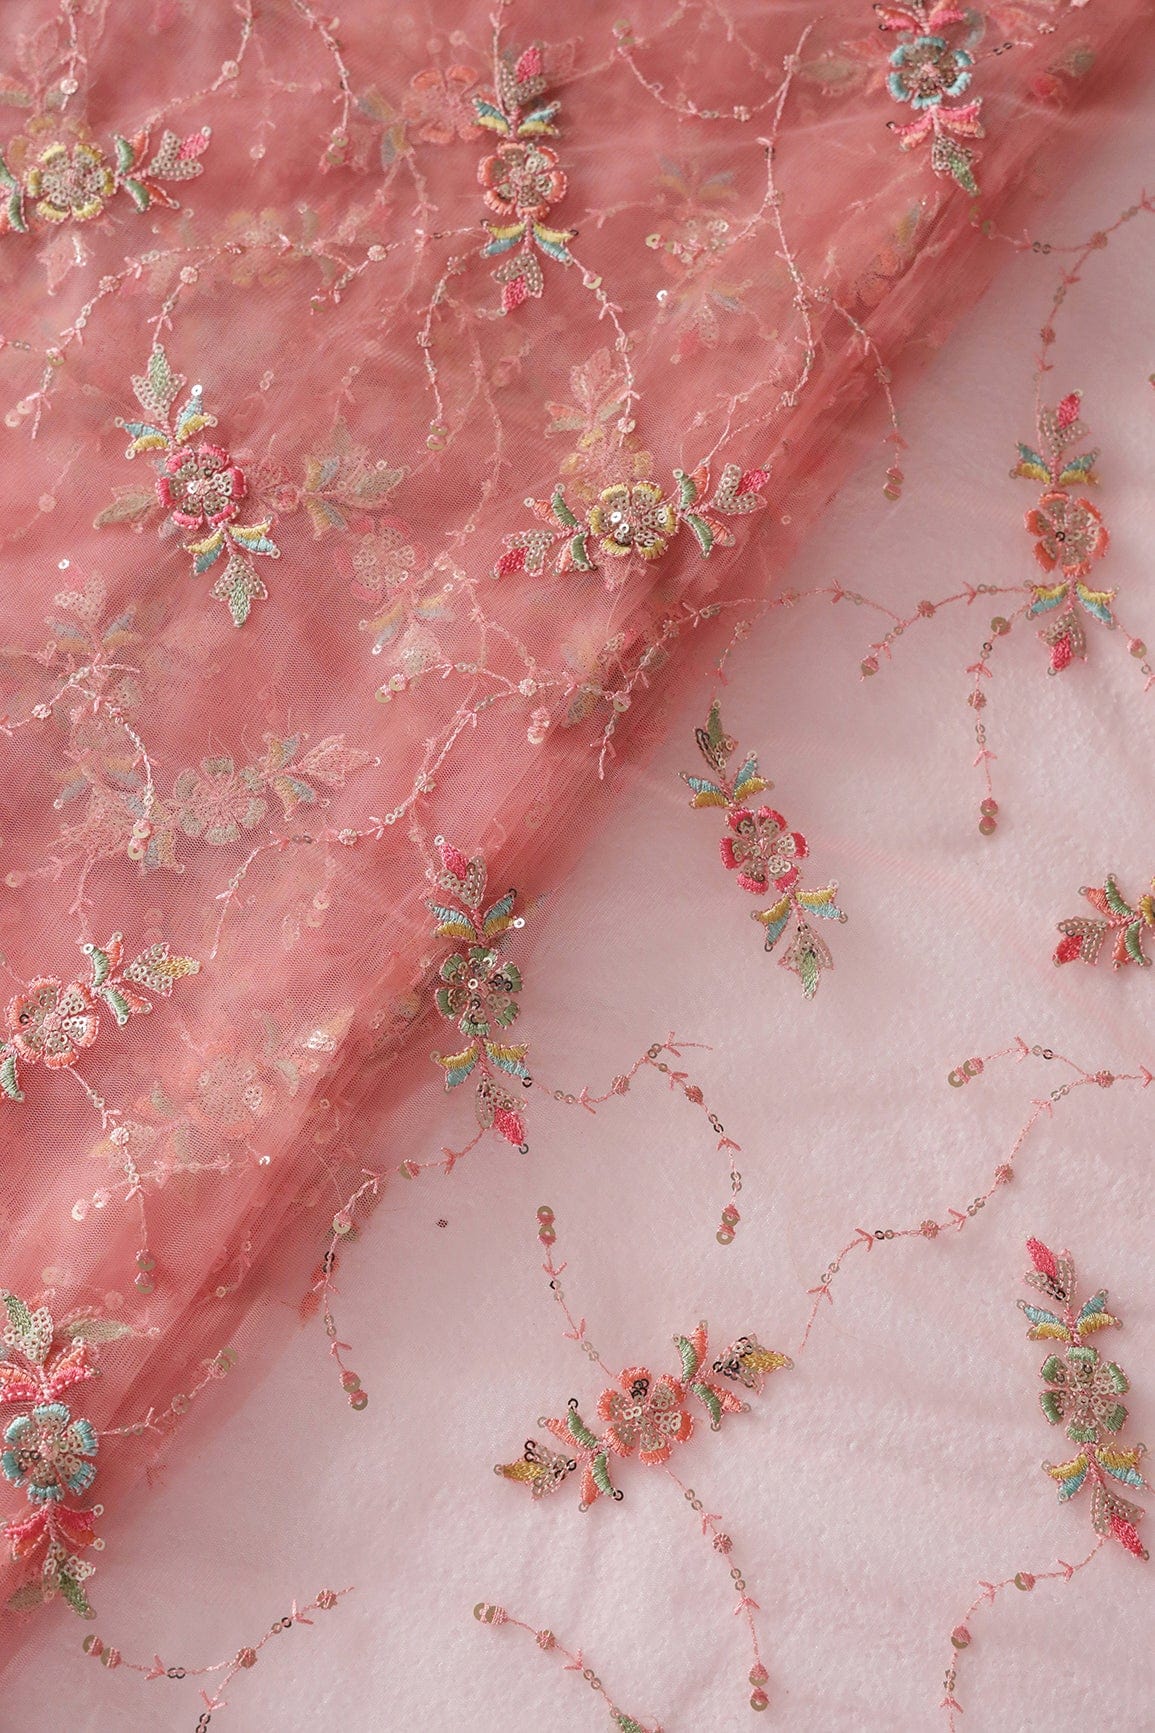 doeraa Embroidery Fabrics Multi Thread With Small Gold Sequins Floral Embroidery On Peach Soft Net Fabric